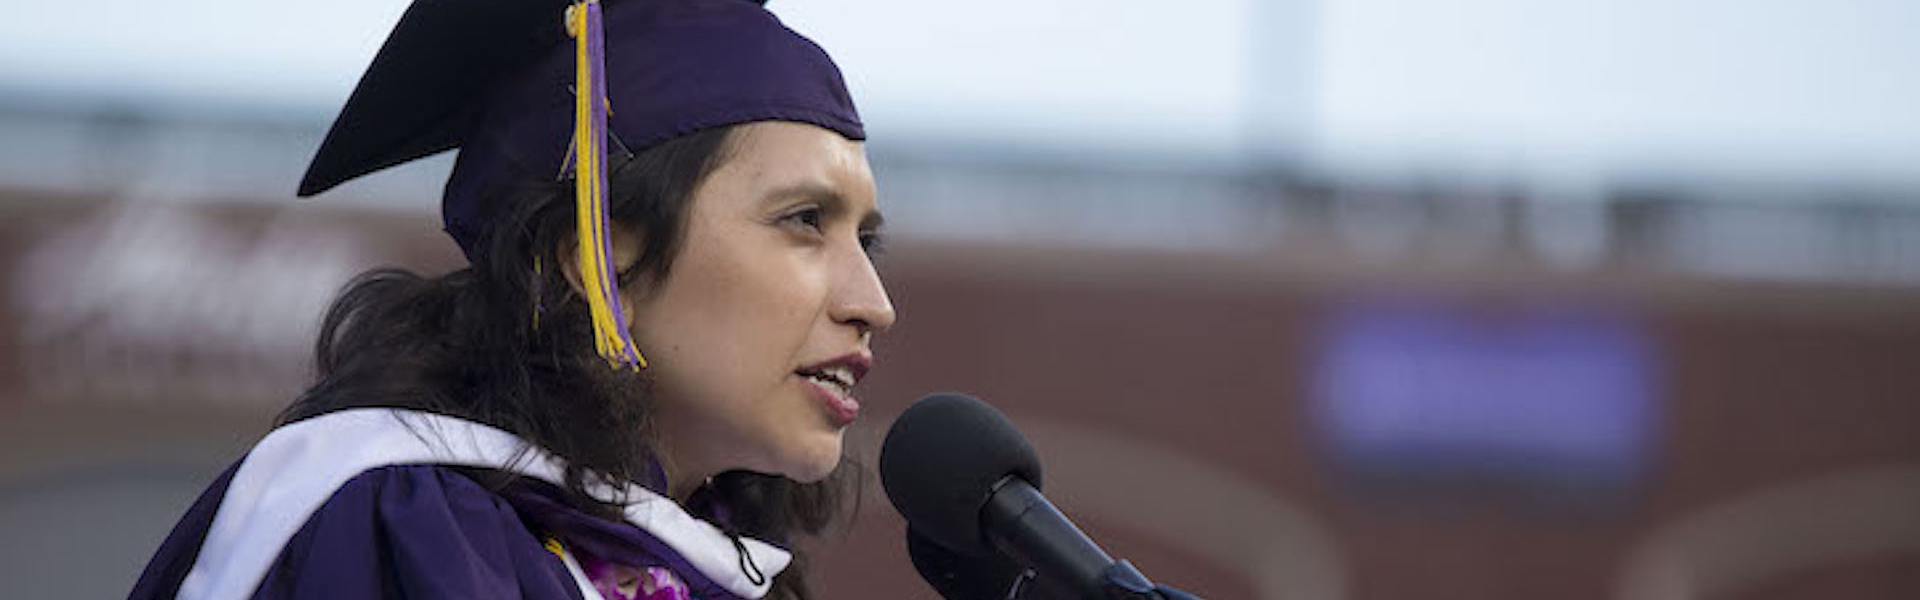 Sanabria Lozano at commencement speaking